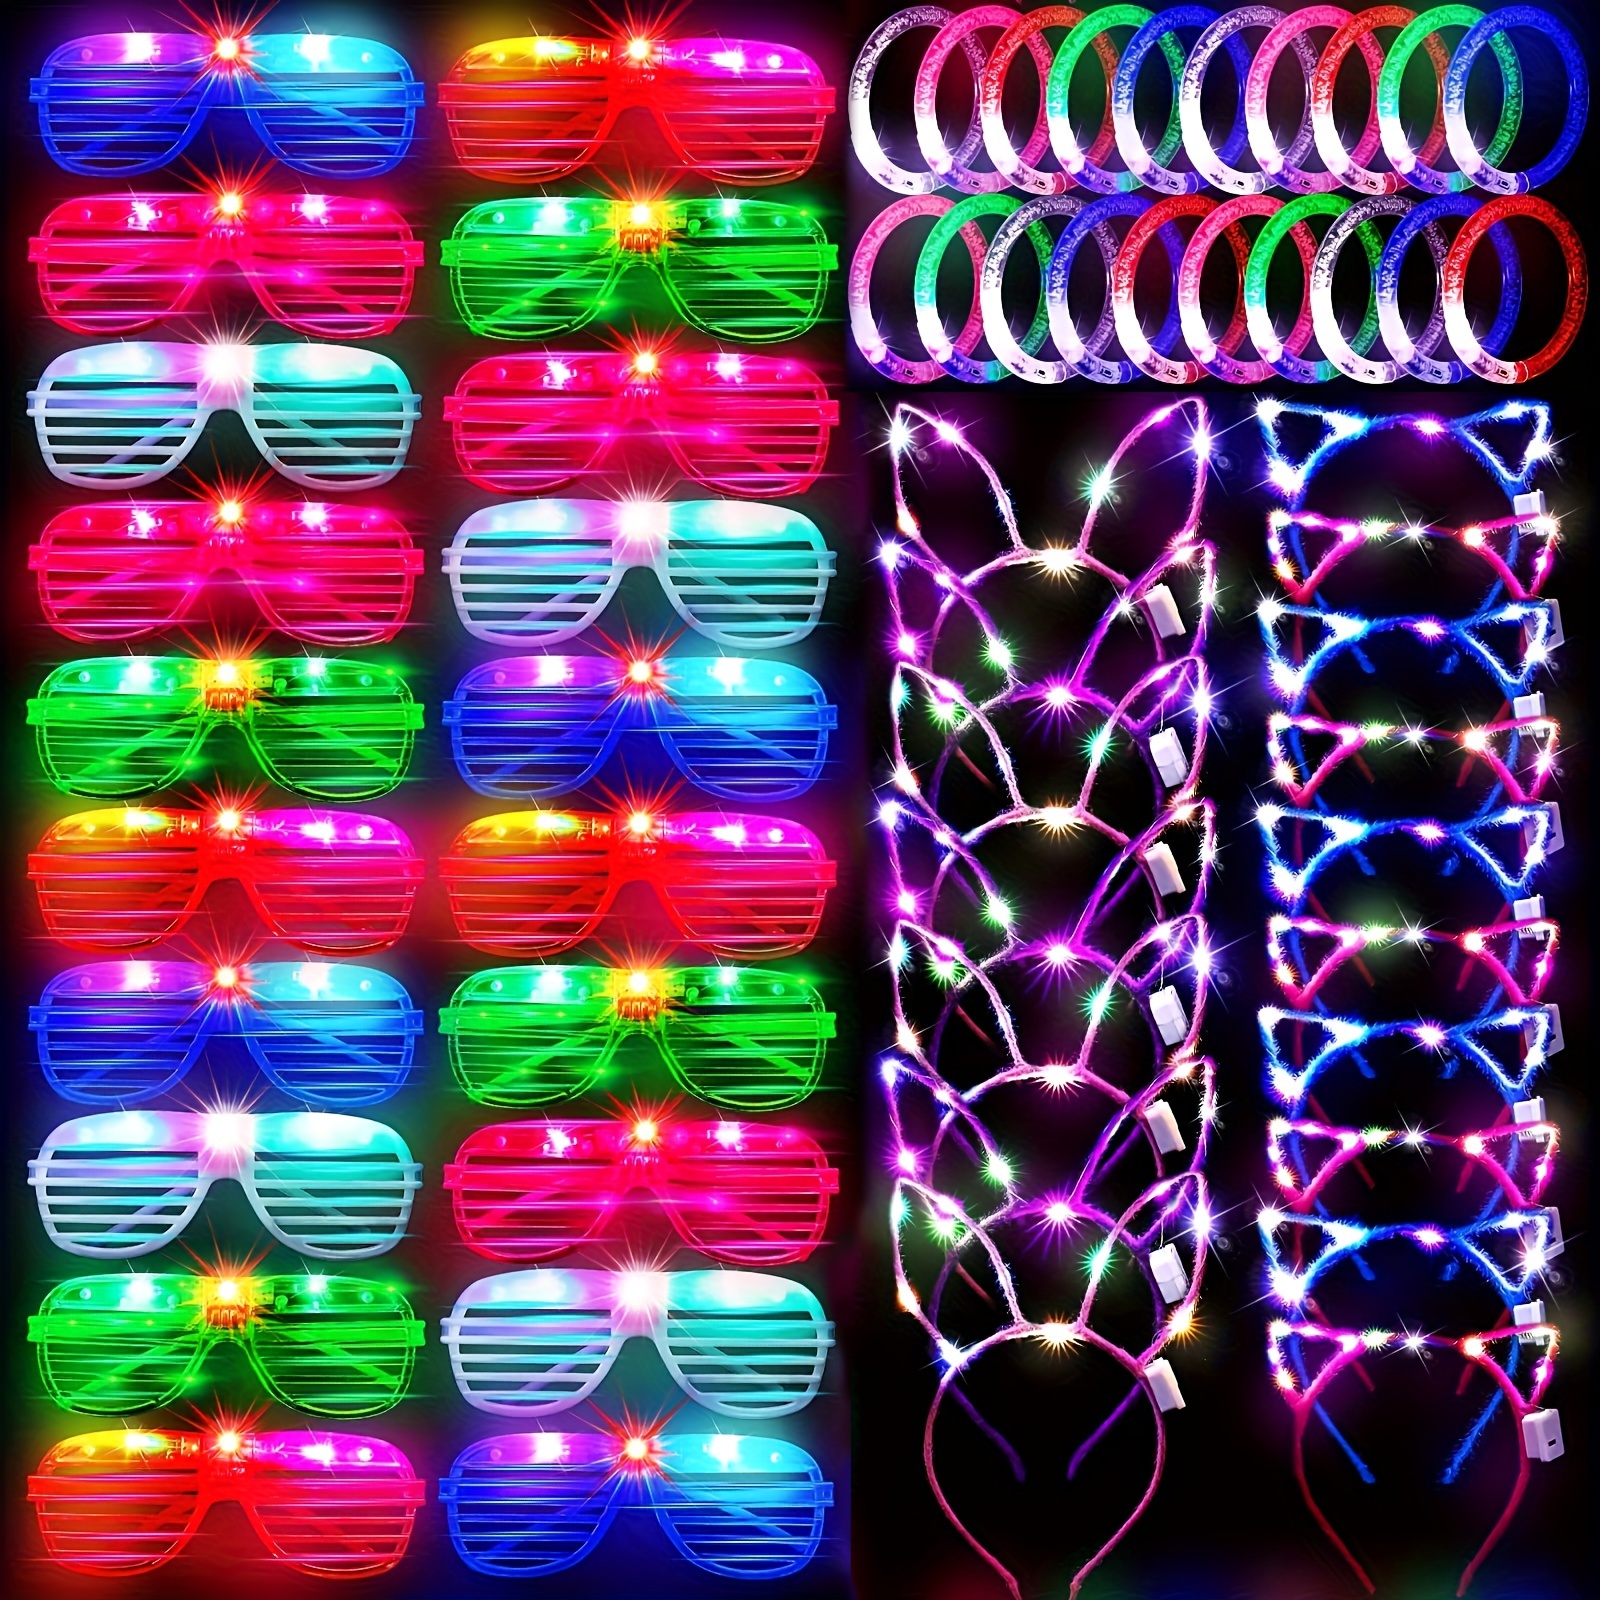 

Glow In The Dark Party Supplies, 60pcs Light Up Party Favors With Sticks Bulk Diy Glow Glasses Headband, Neon Party Supplies & Decorations